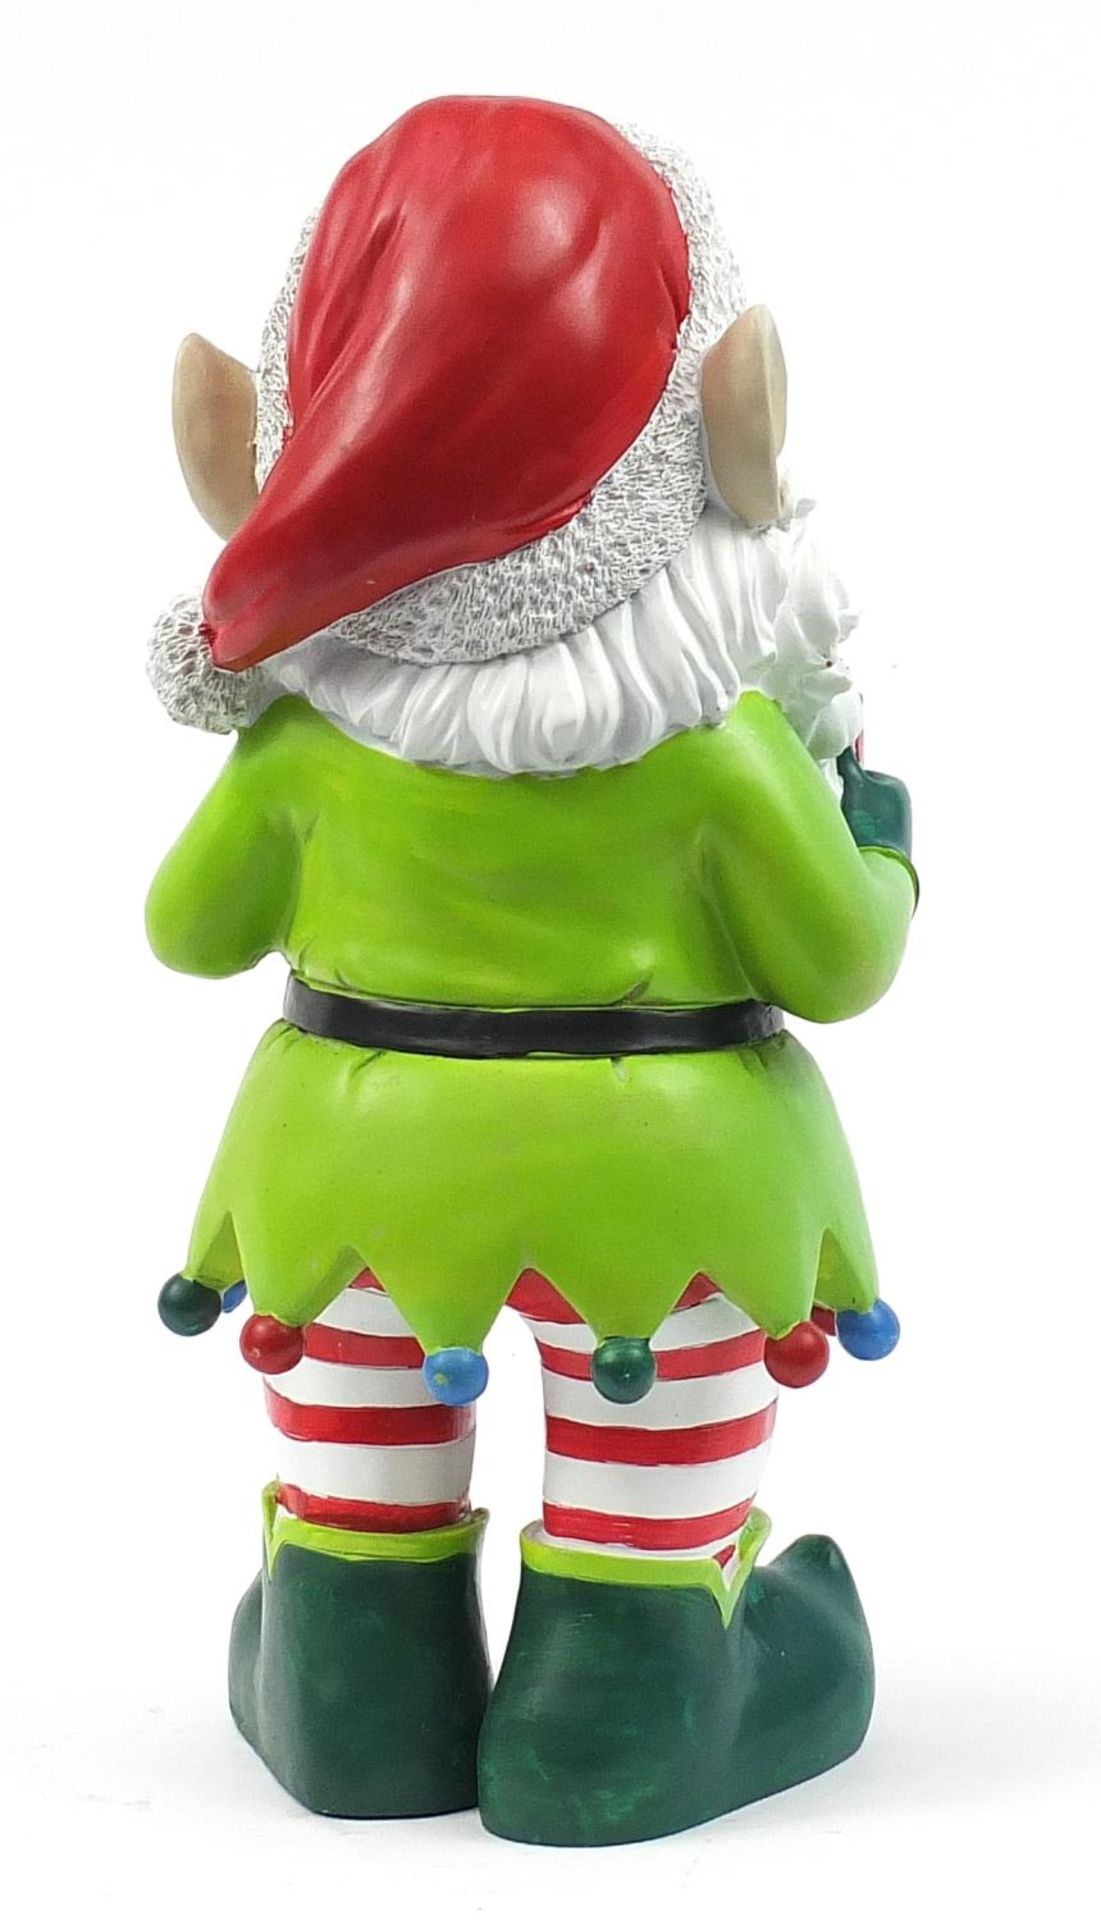 Large garden gnome ornament with 'stop here' sign, 60cm high - Image 2 of 4